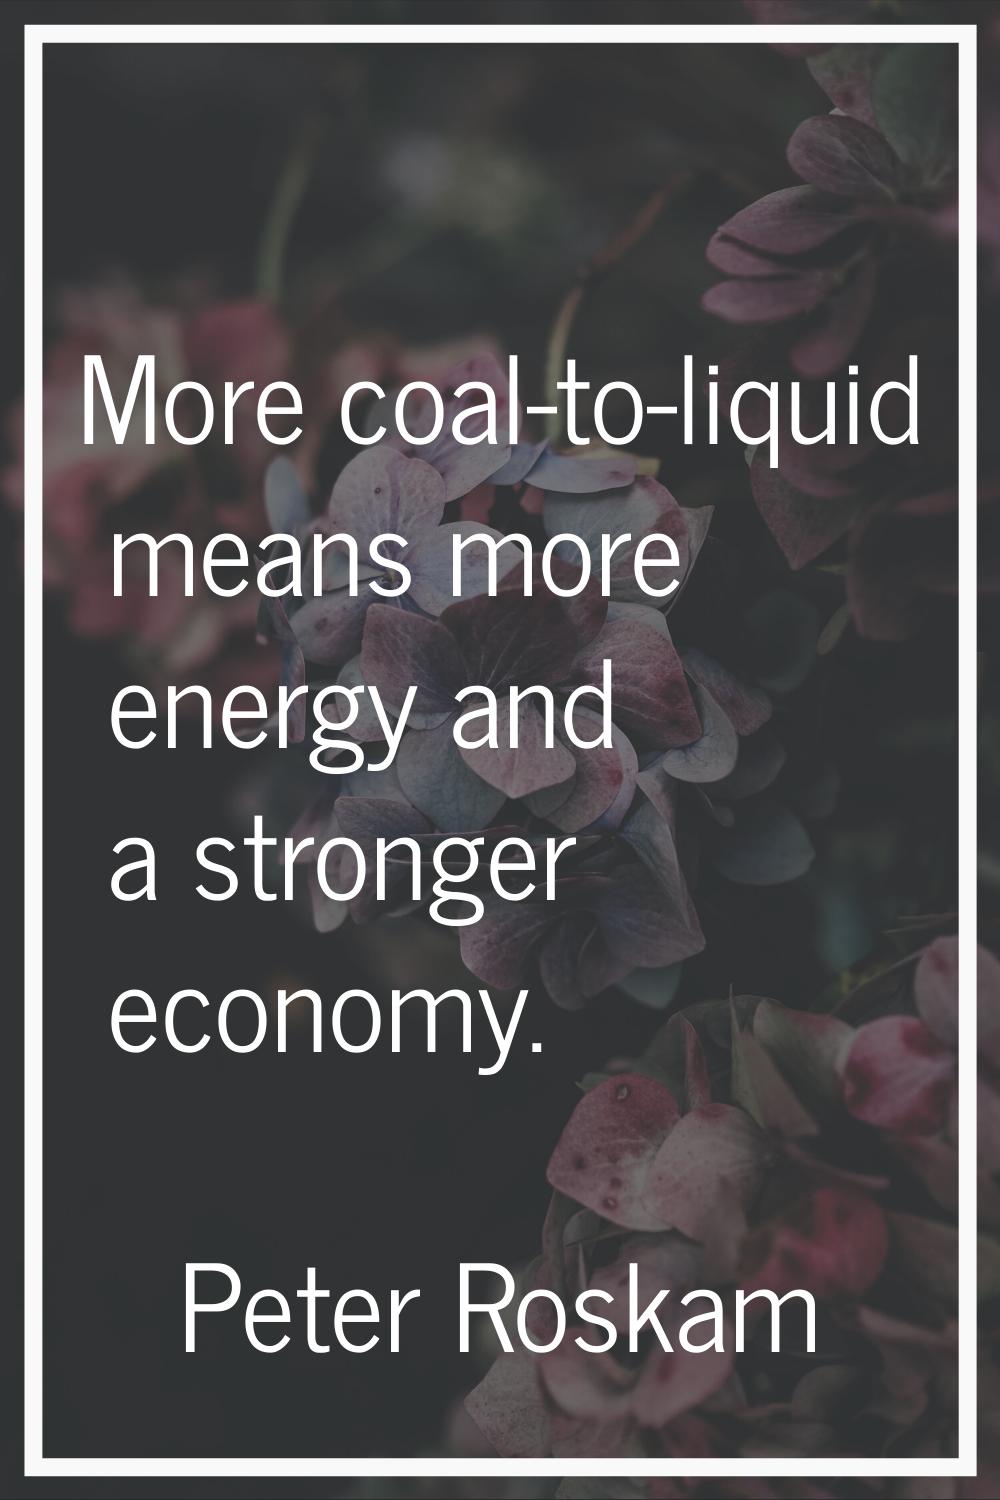 More coal-to-liquid means more energy and a stronger economy.